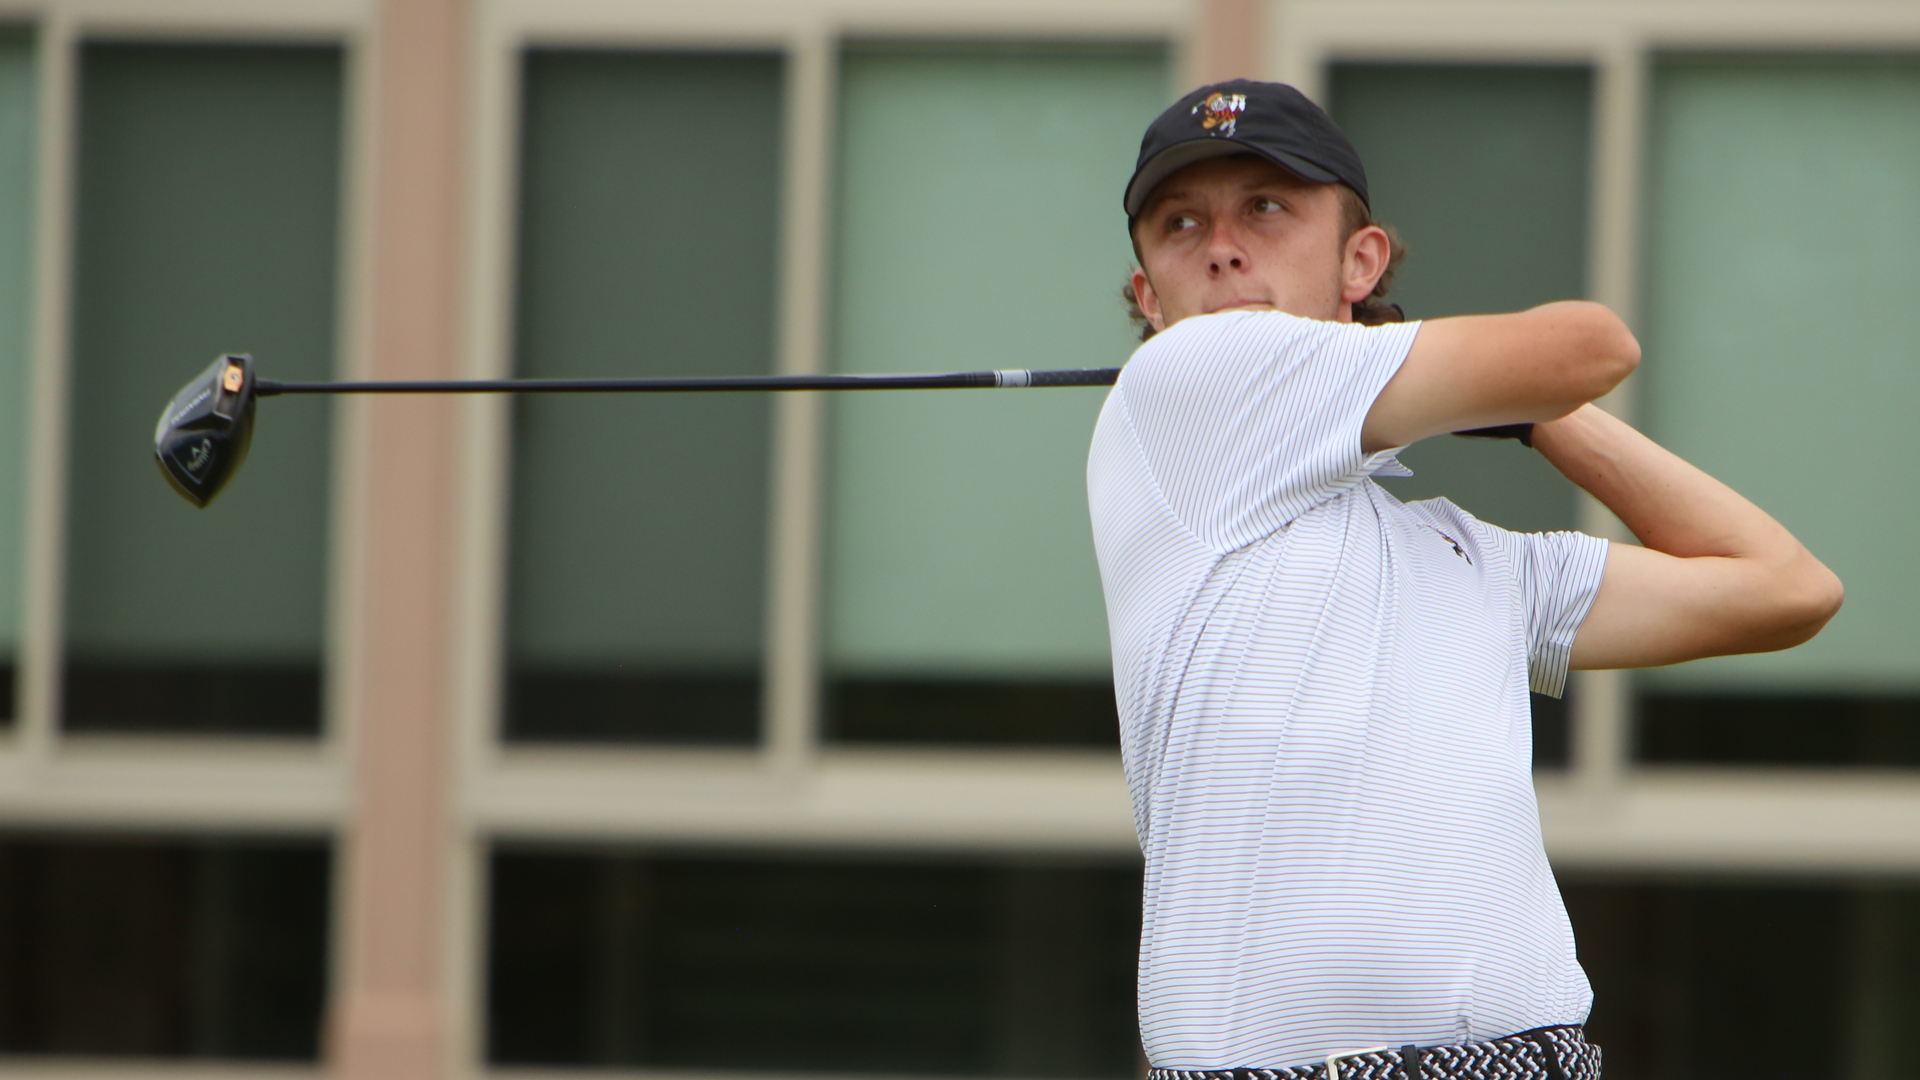 Dominic Barron Holden shot 69 for his opening round and was tied for 8th place at the Saint Leo Invitational.